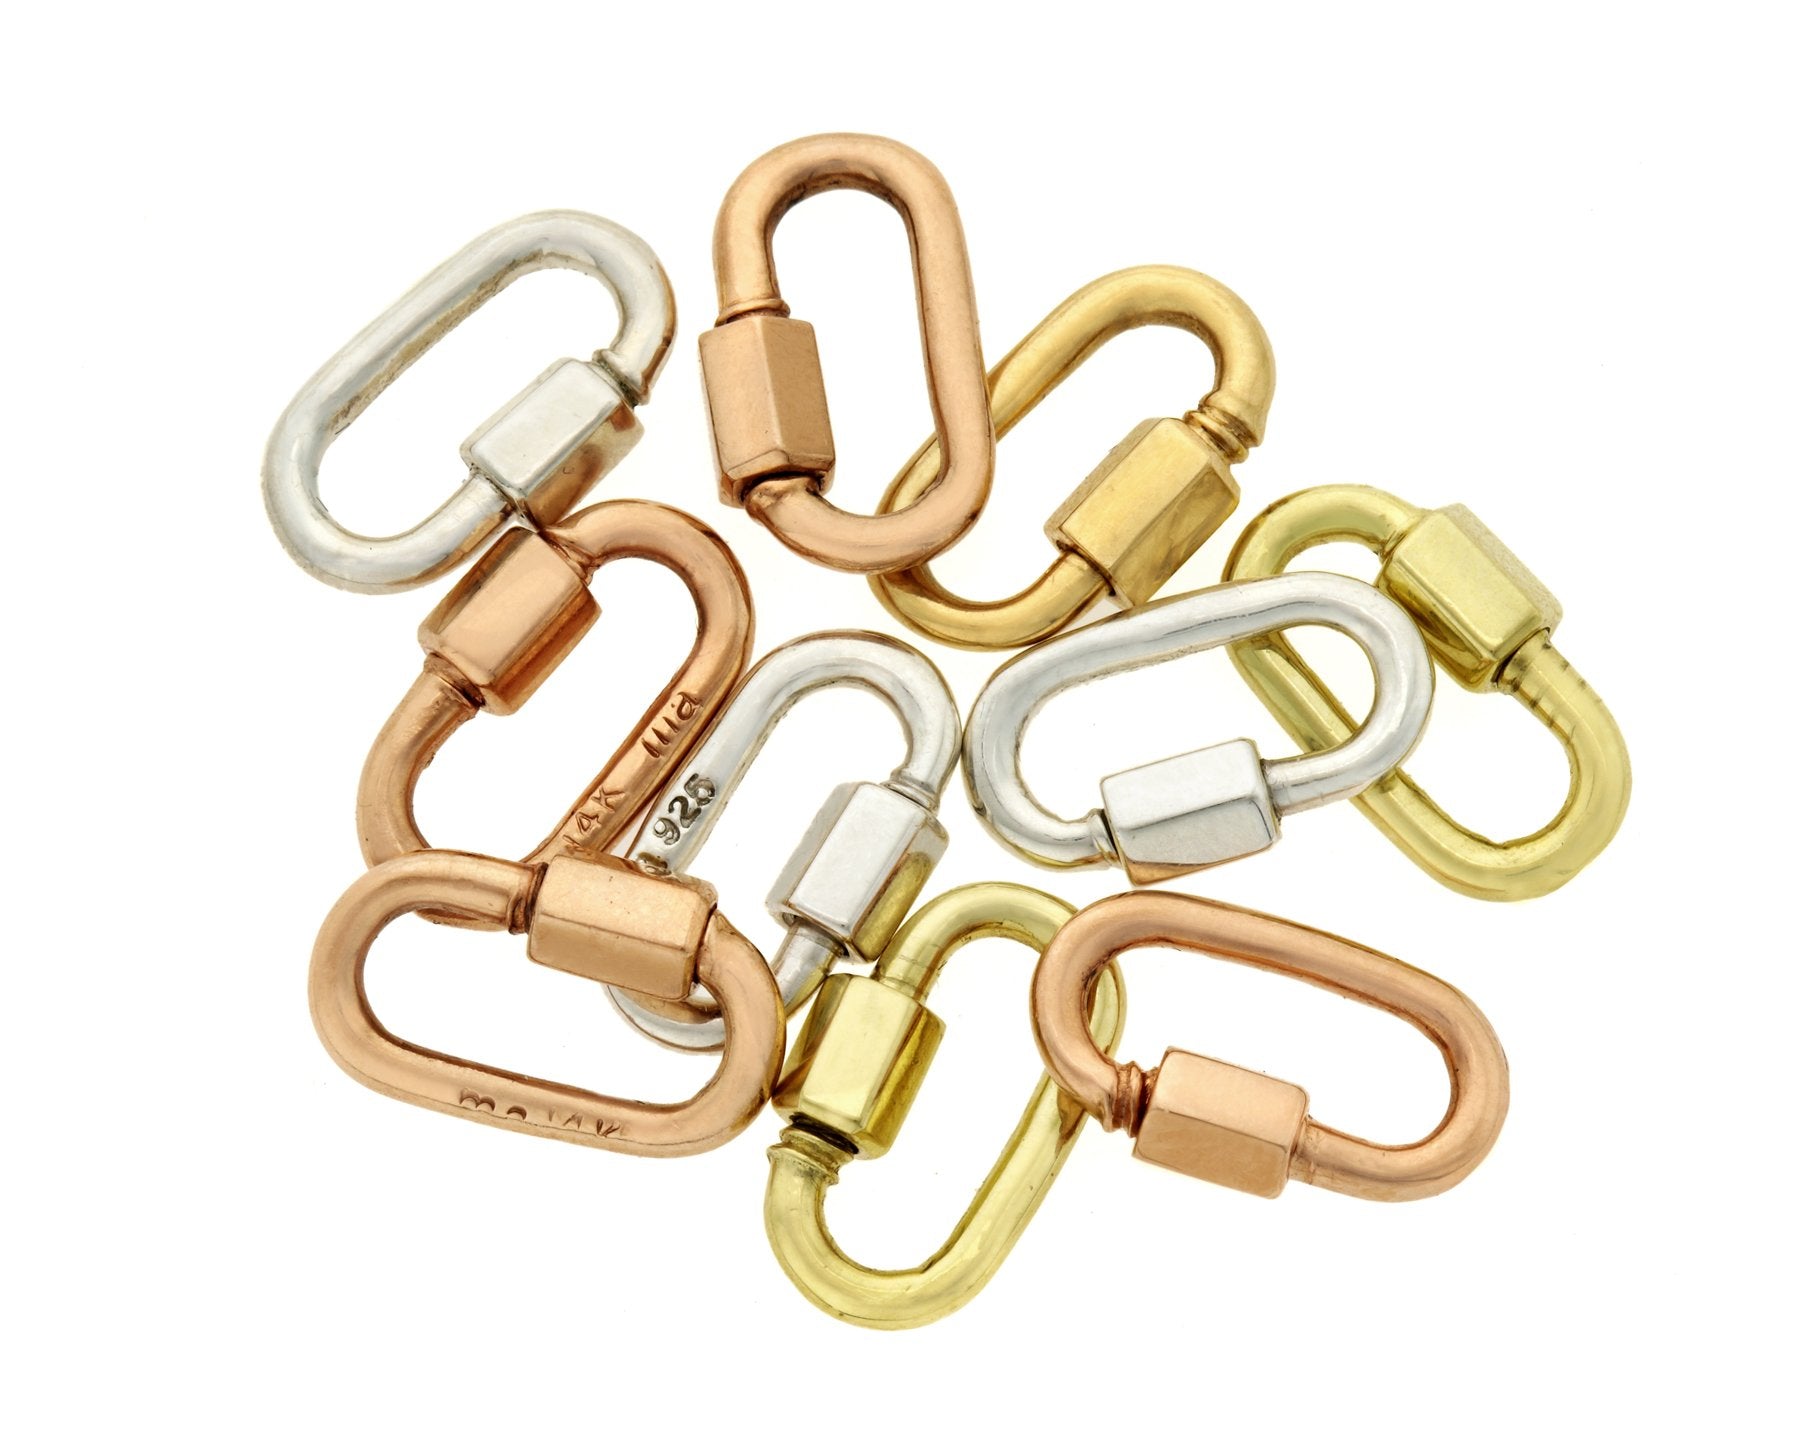 Small pile of Marla Aaron babylocks in different metals against white backdrop